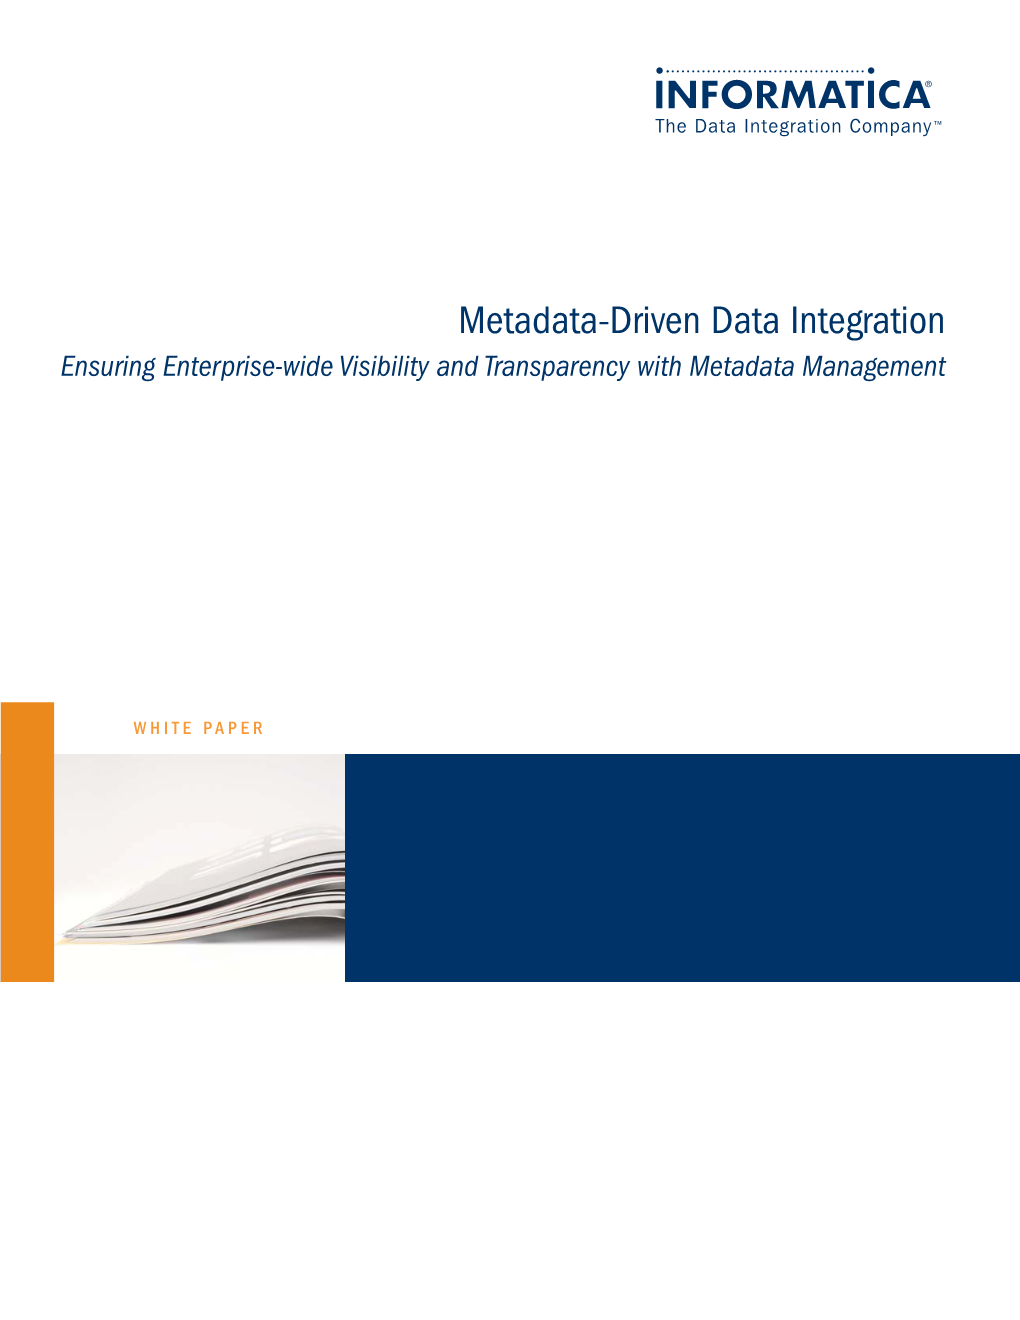 Metadata-Driven Data Integration Ensuring Enterprise-Wide Visibility and Transparency with Metadata Management